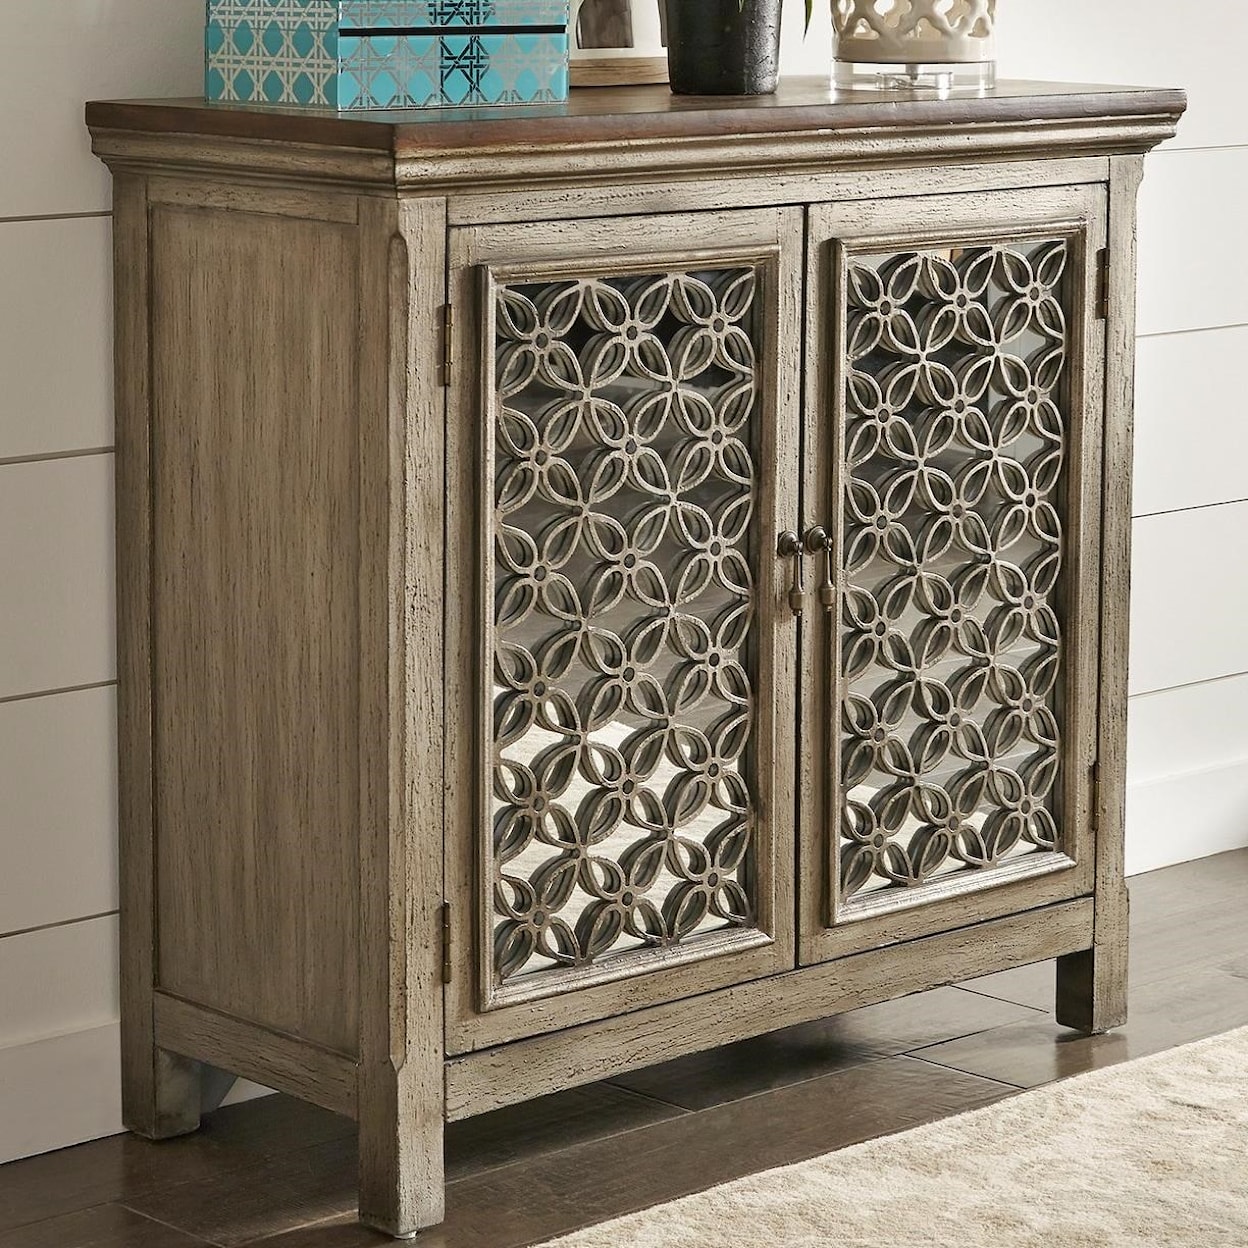 Libby Eclectic Living Accents 2-Door Accent Cabinet